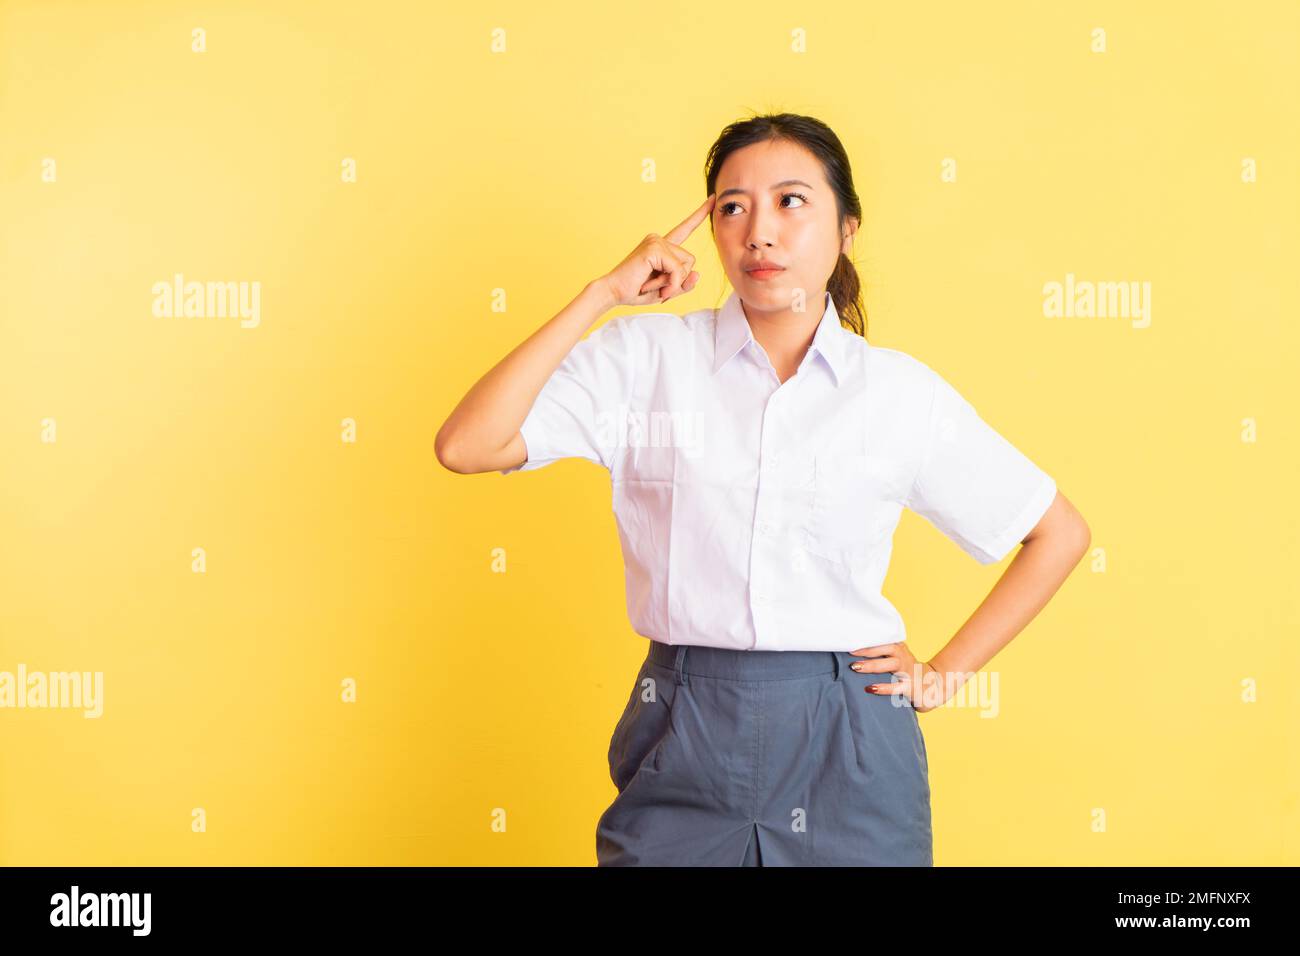 thinking expression of teenage girl in high school uniform Stock Photo